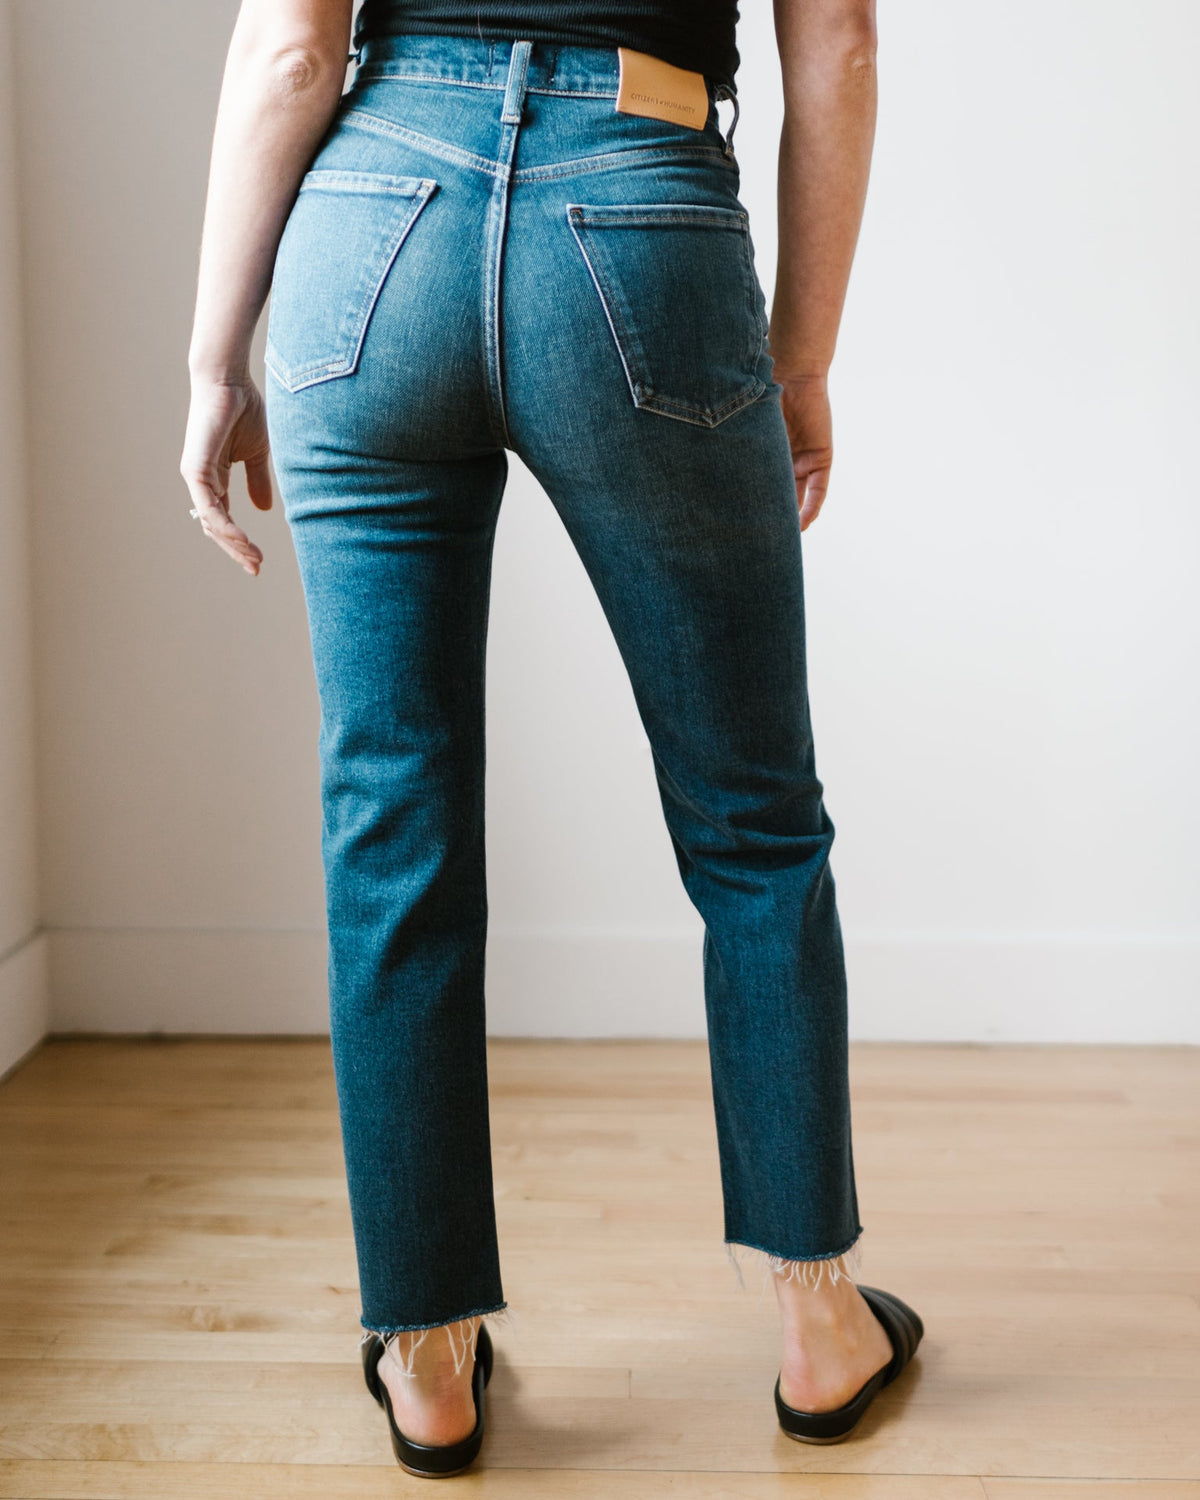 Citizens of Humanity Denim Daphne Crop High Rise Stovepipe in Trinket